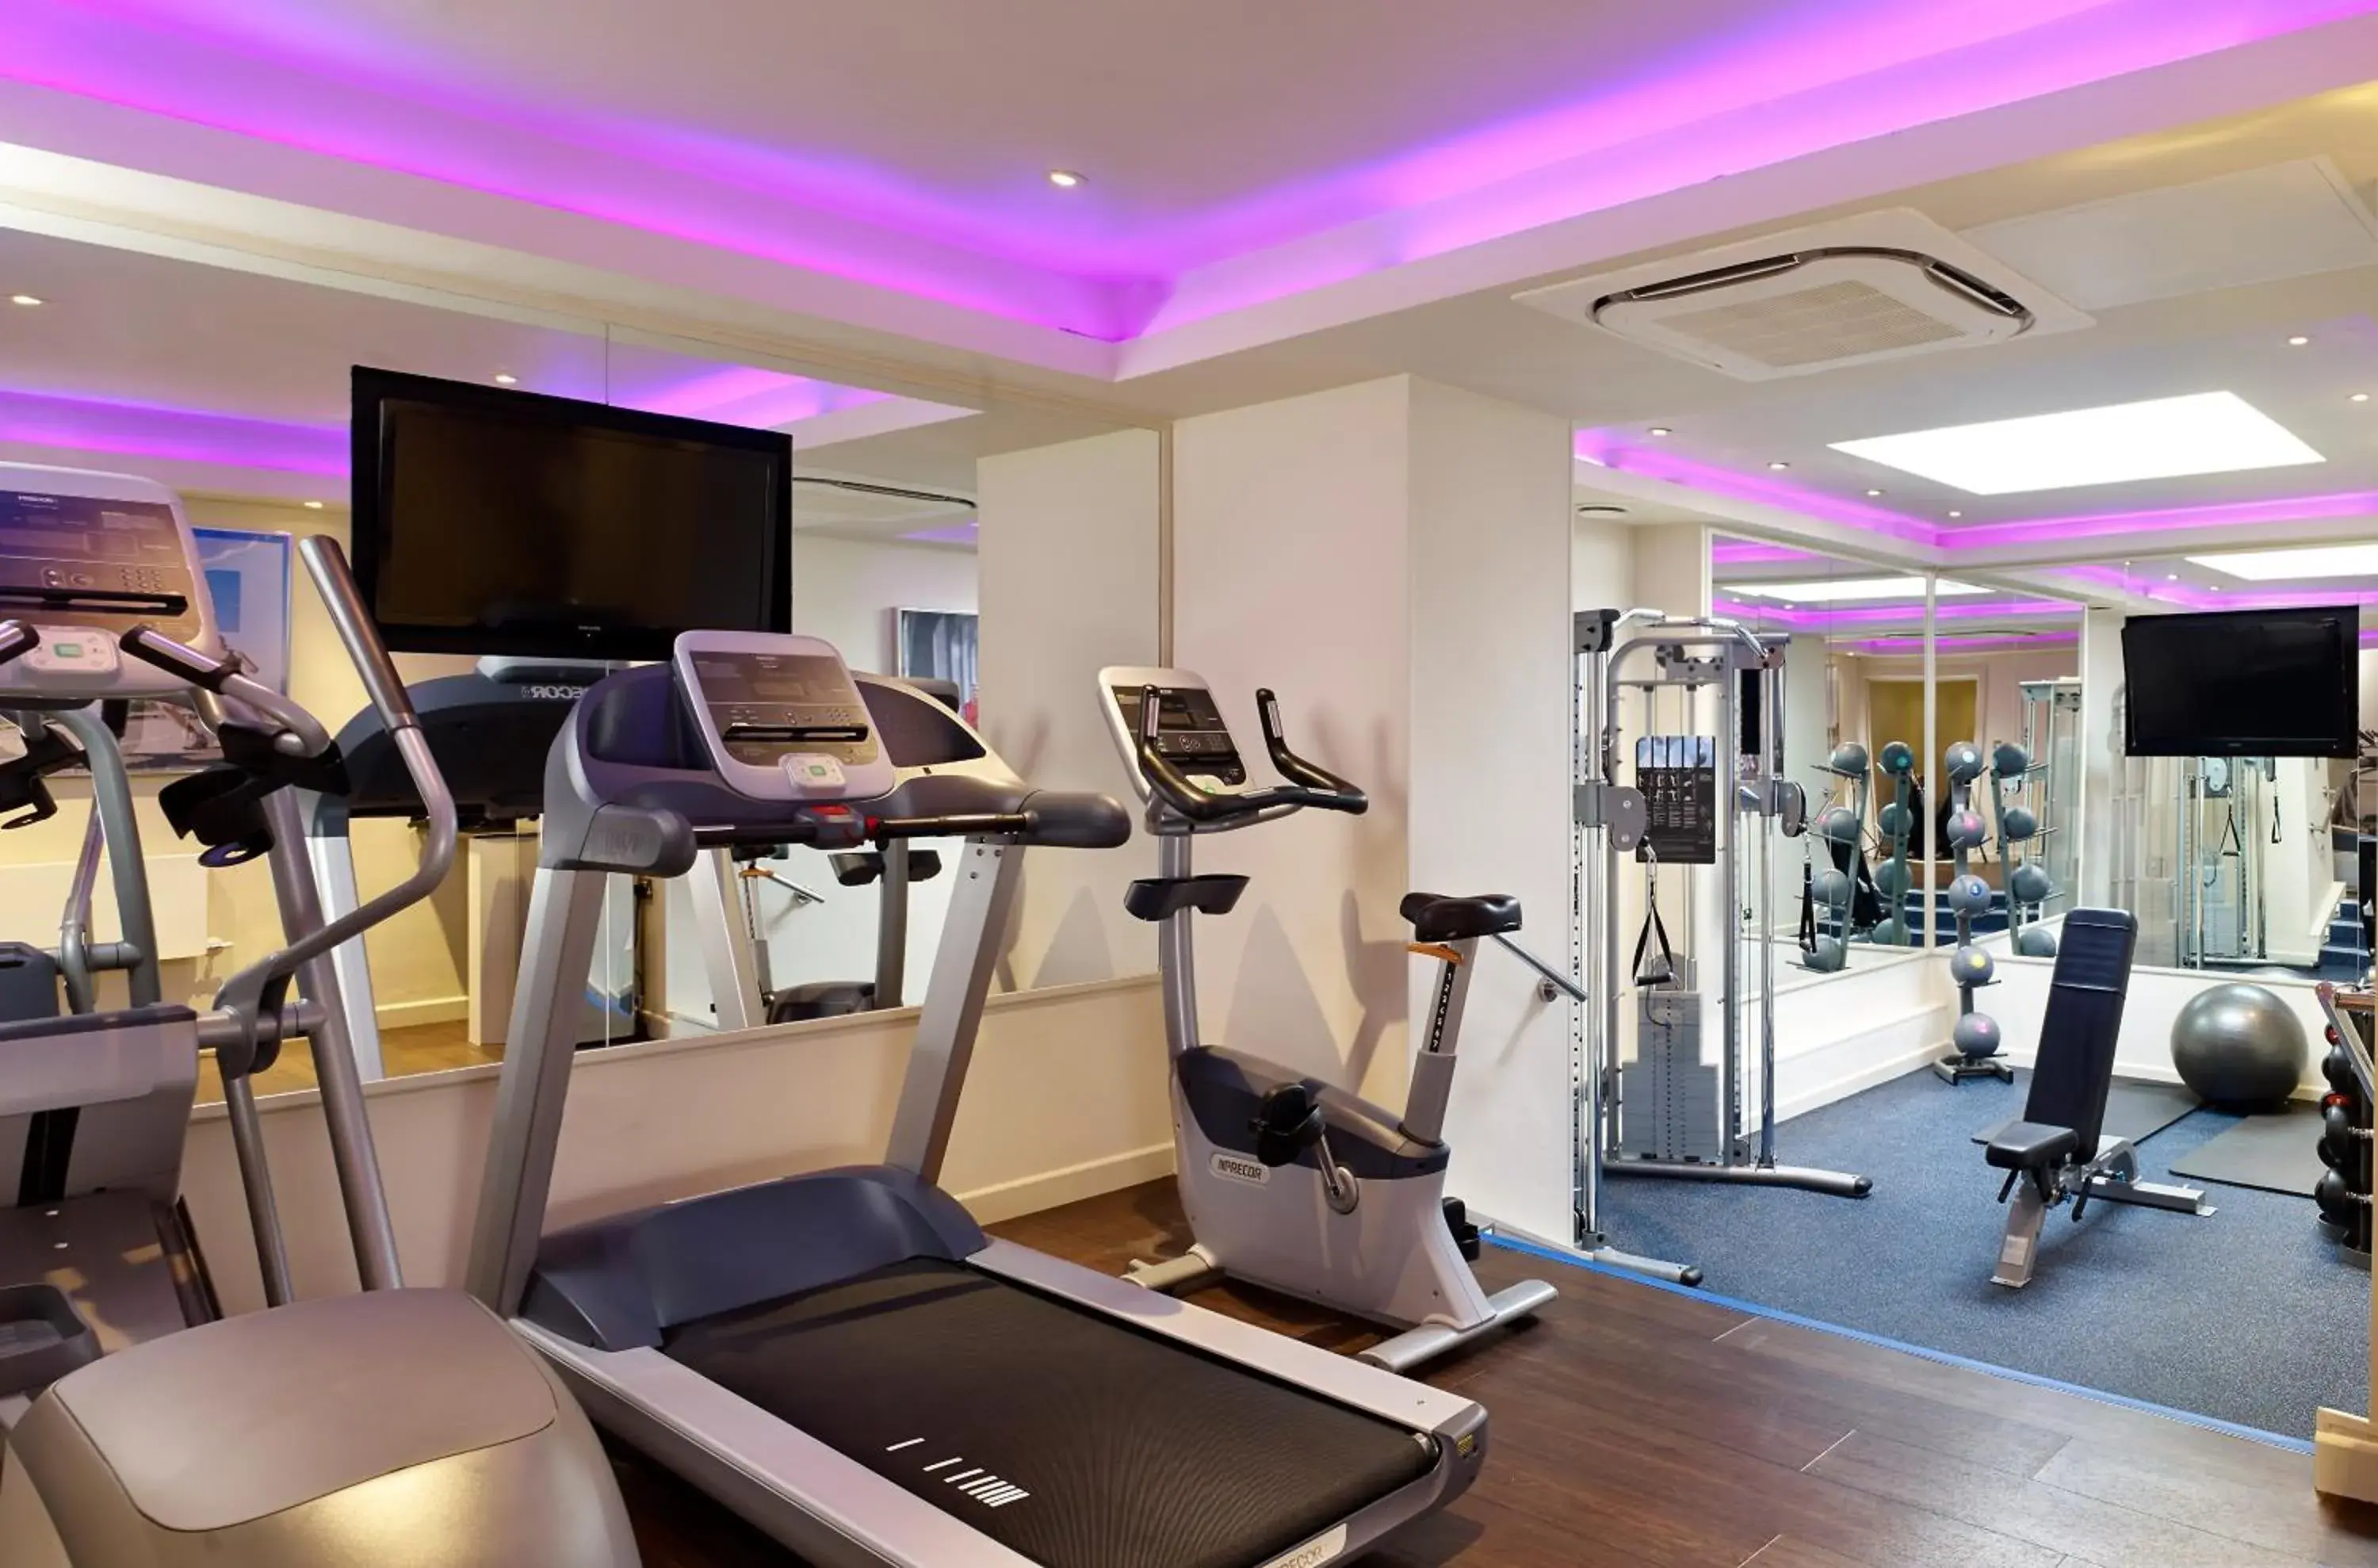 Fitness centre/facilities, Fitness Center/Facilities in Blakemore Hyde Park